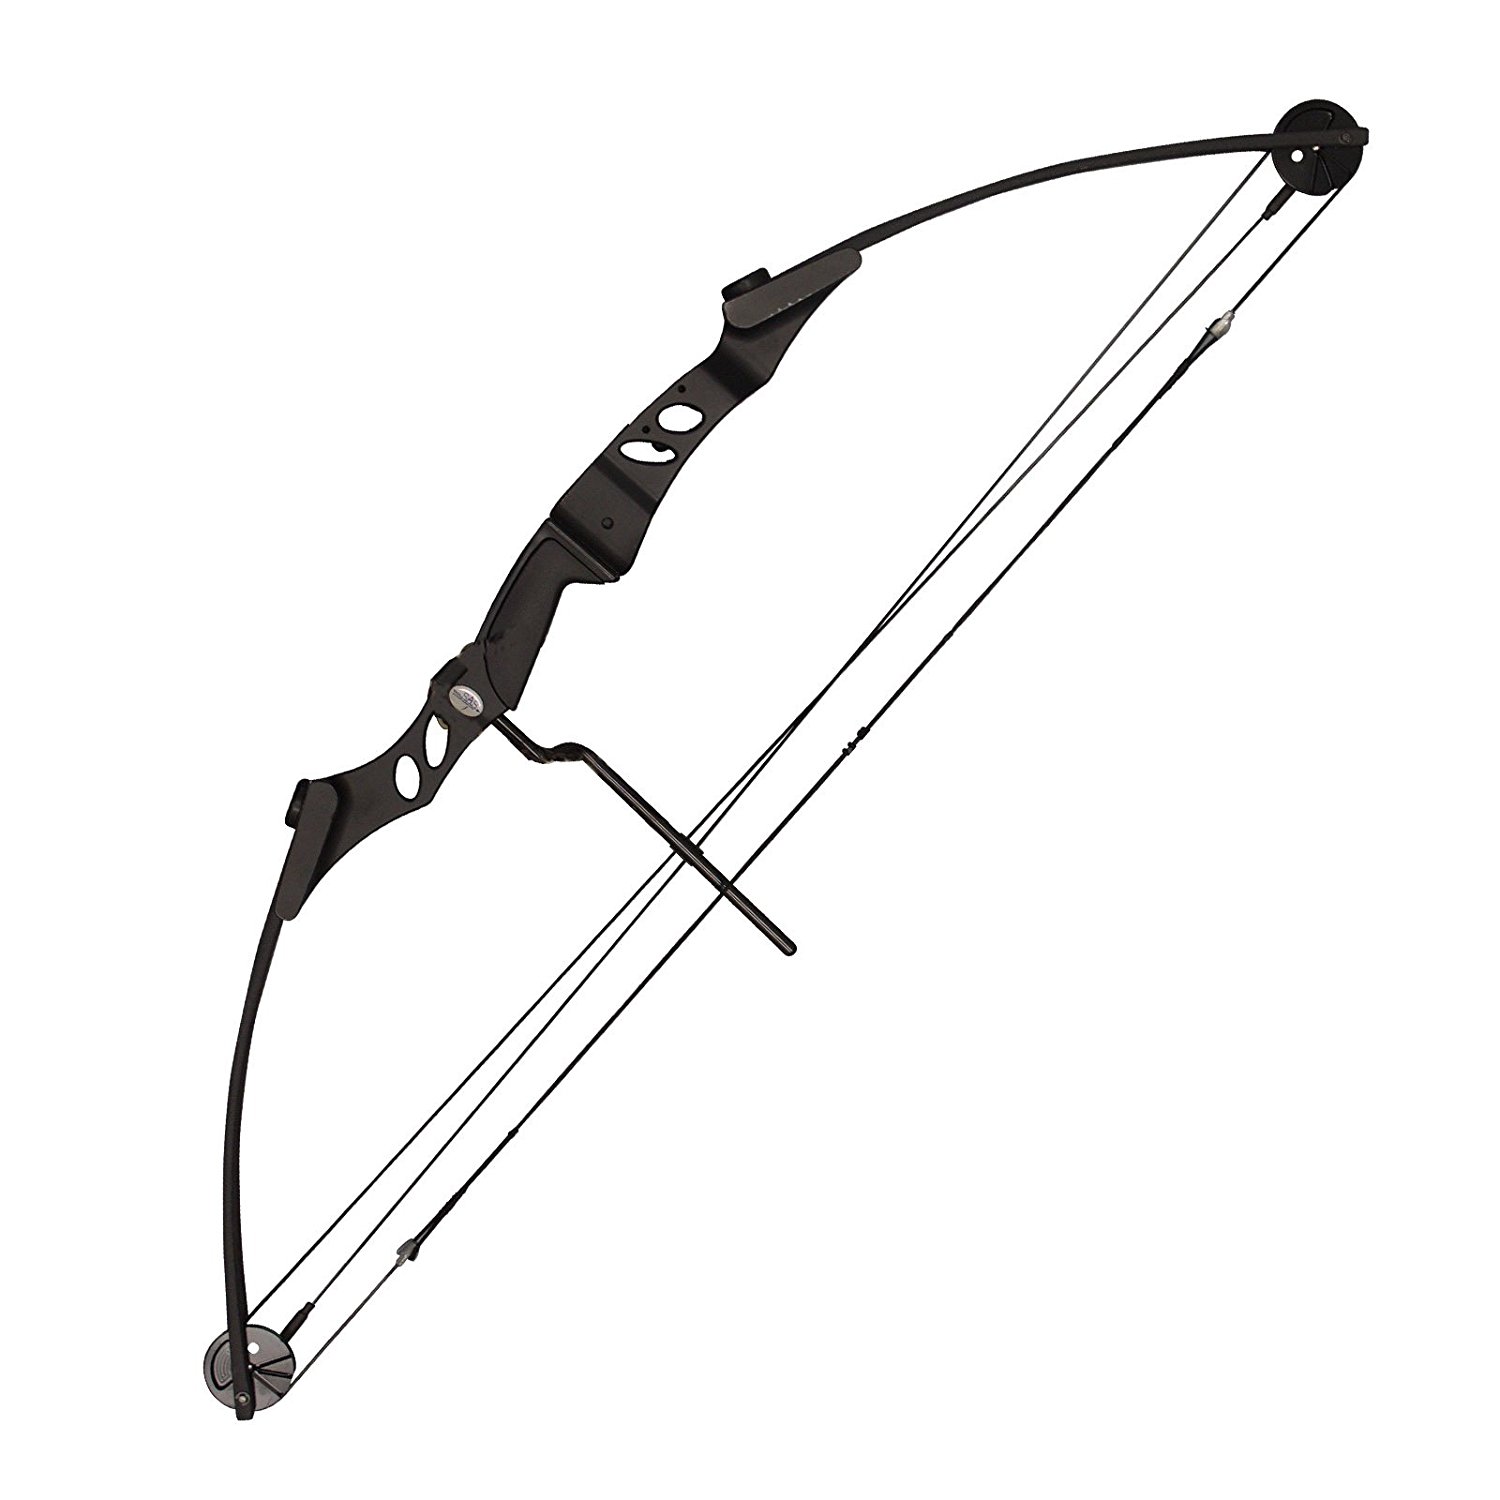 Diamond Infinite Edge Pro Review: Ideal Compound Bow for Bowhunters and Archery